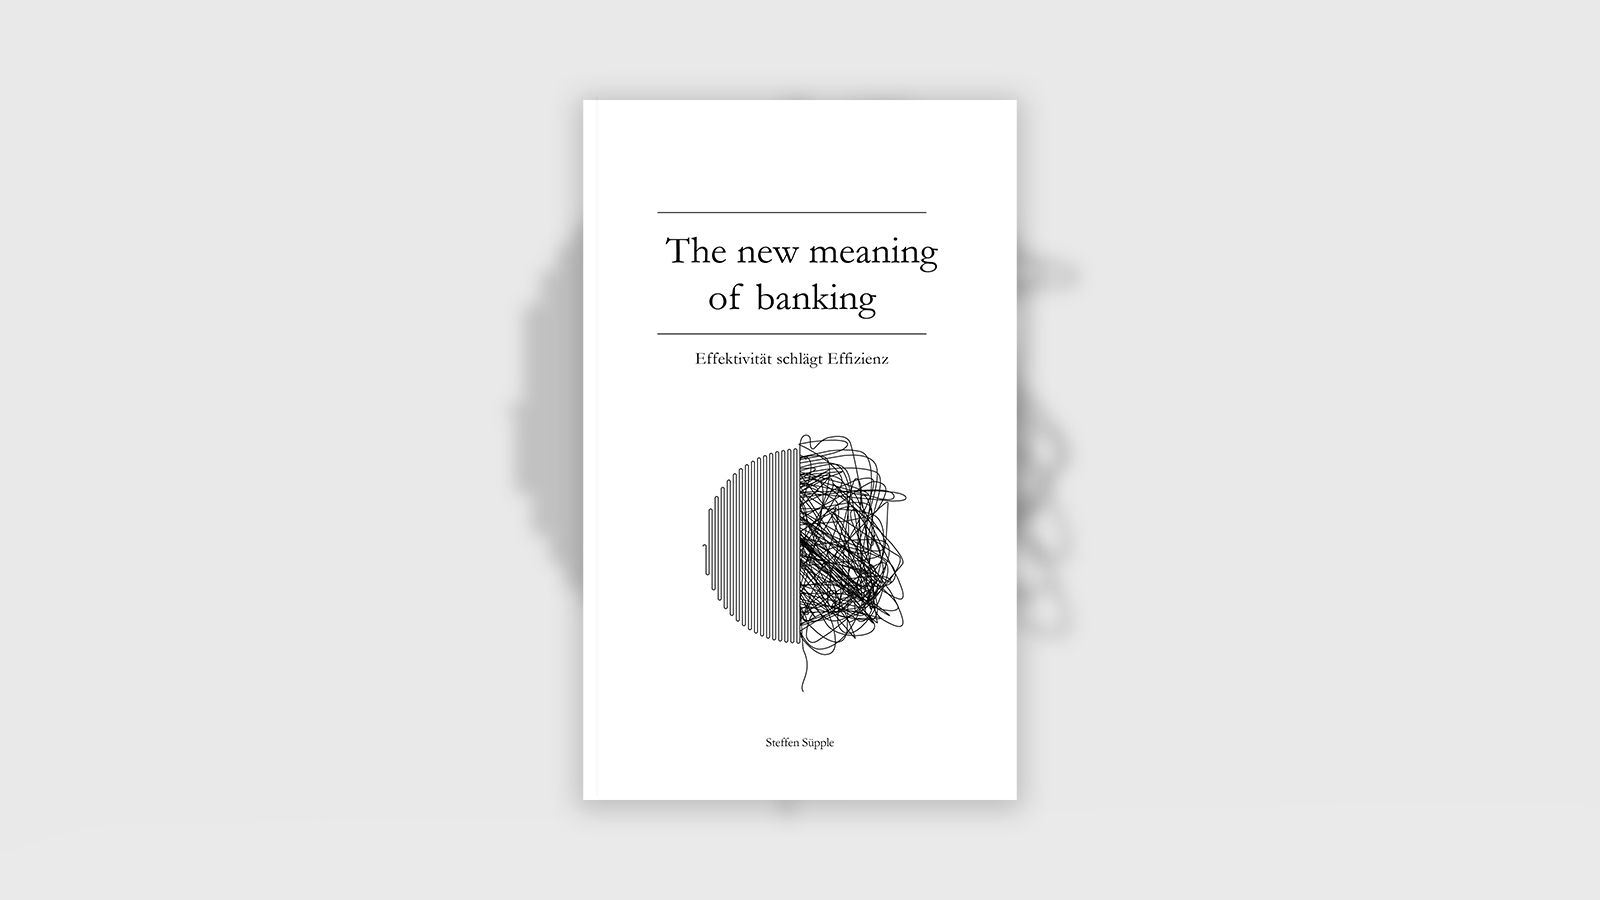 The new meaning of banking